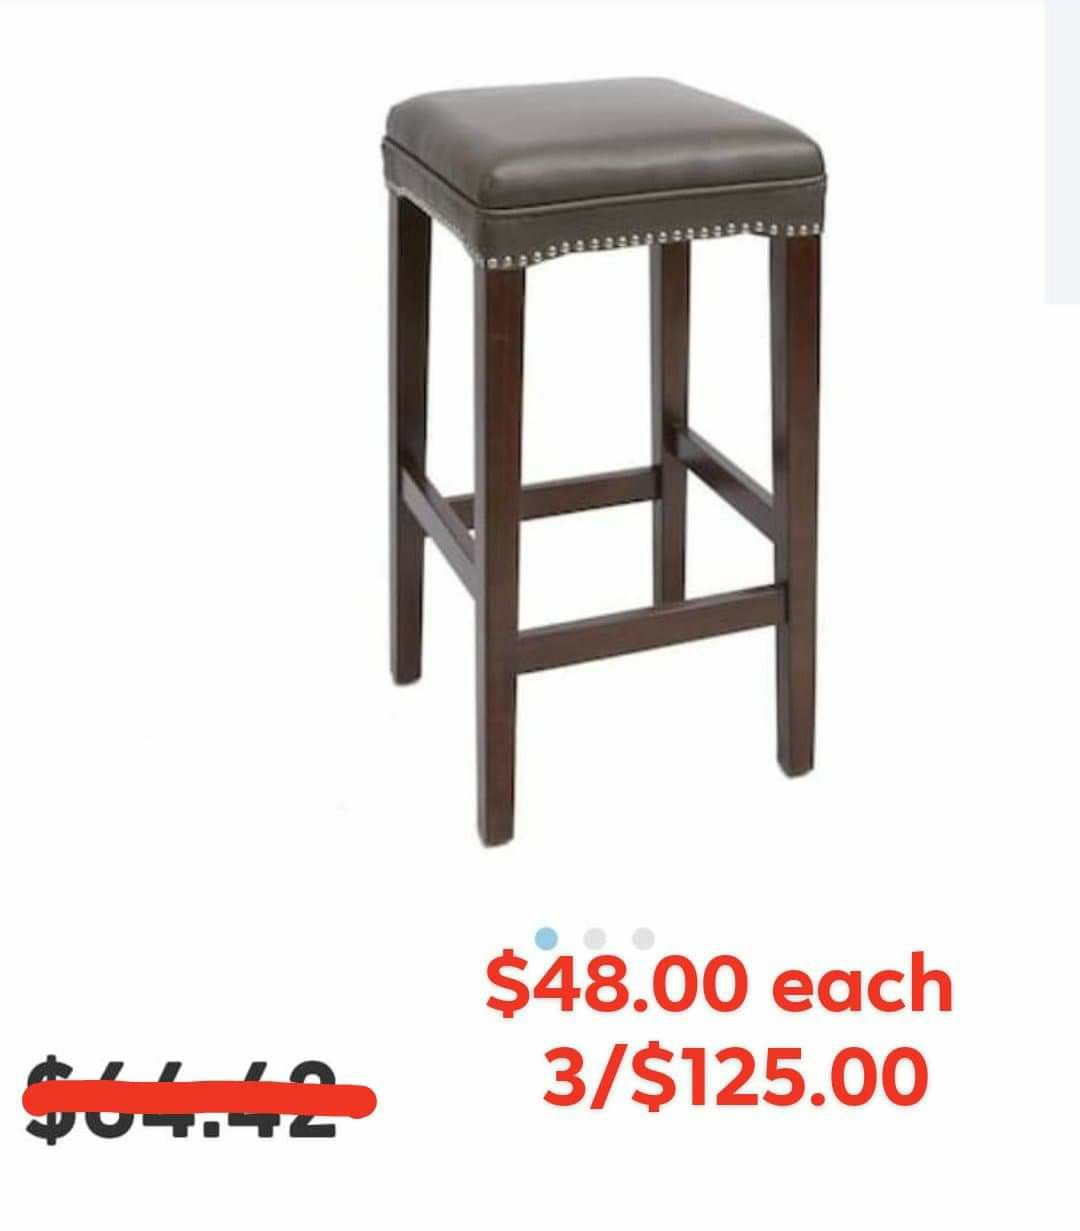 Cheyenne faux leather upholstered bar stools